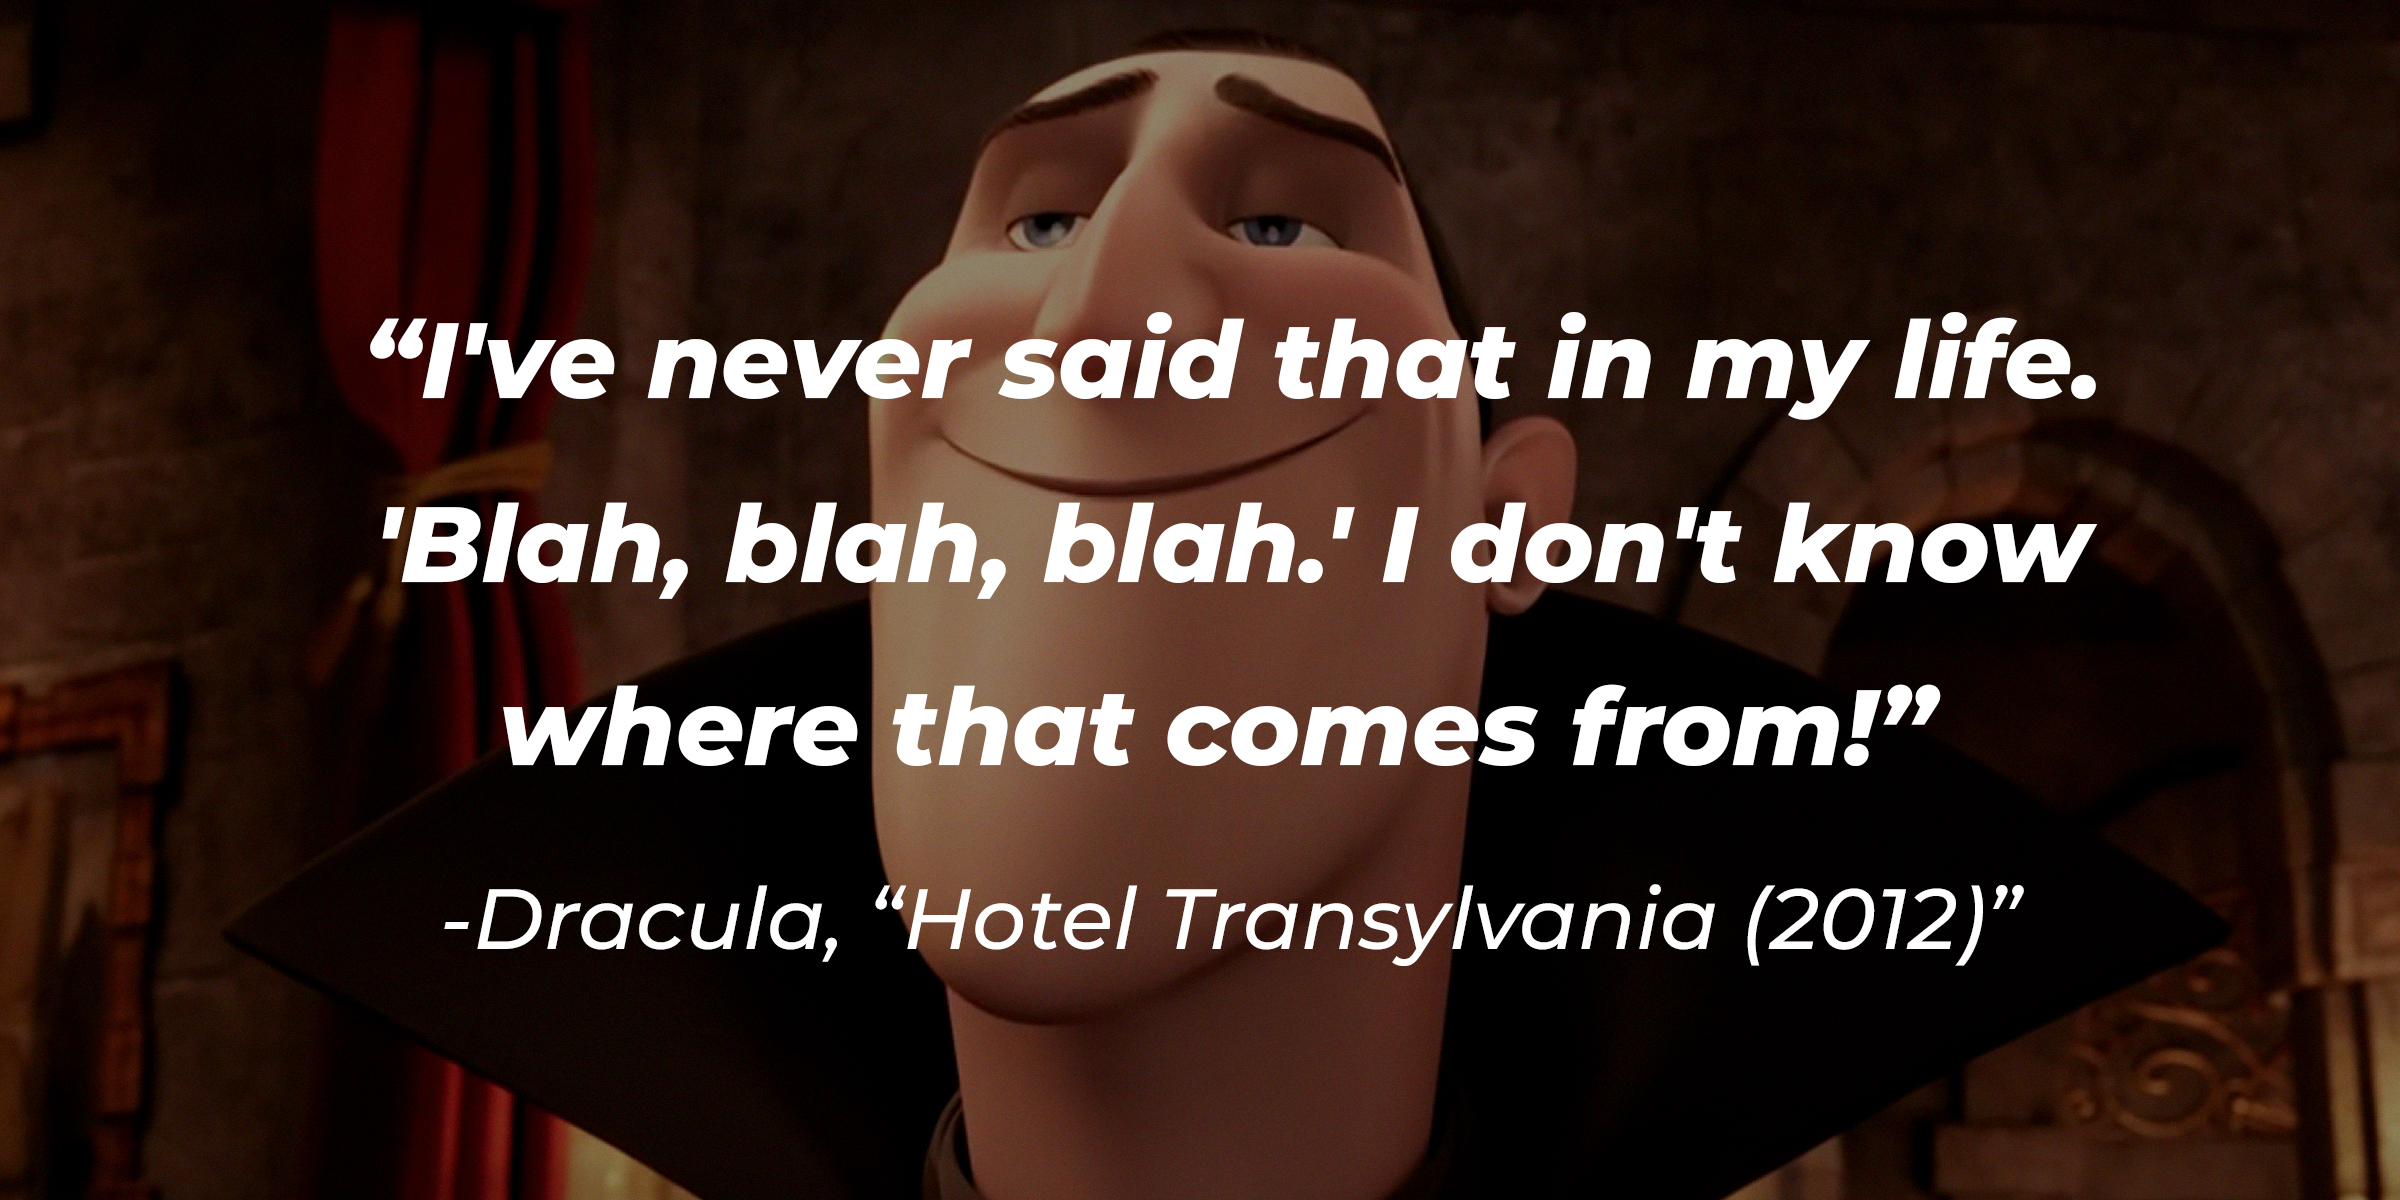 Dracula's quote: “I've never said that in my life. 'Blah, blah, blah.' I don't know where that comes from!” | Source: youtube.com/SonyPicturesEntertainmentIndia